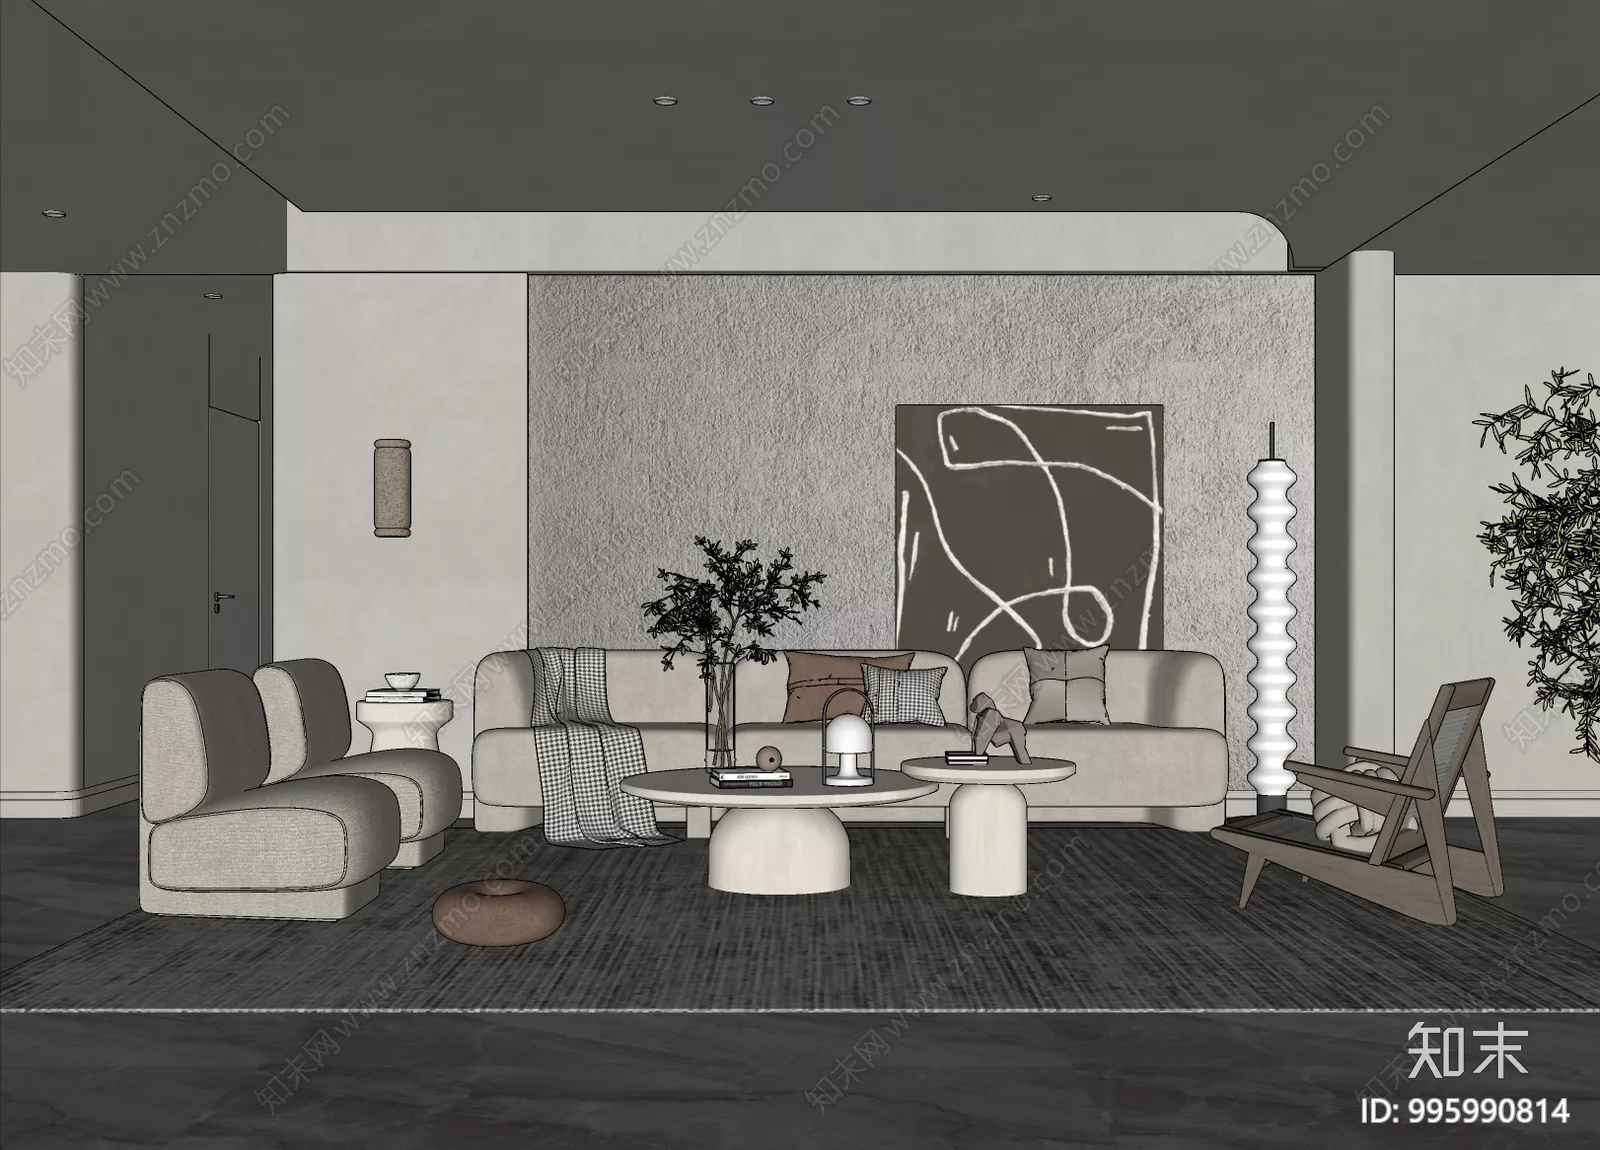 WABI SABI INTERIOR COLLECTION - SKETCHUP 3D SCENE - VRAY OR ENSCAPE - ID17921